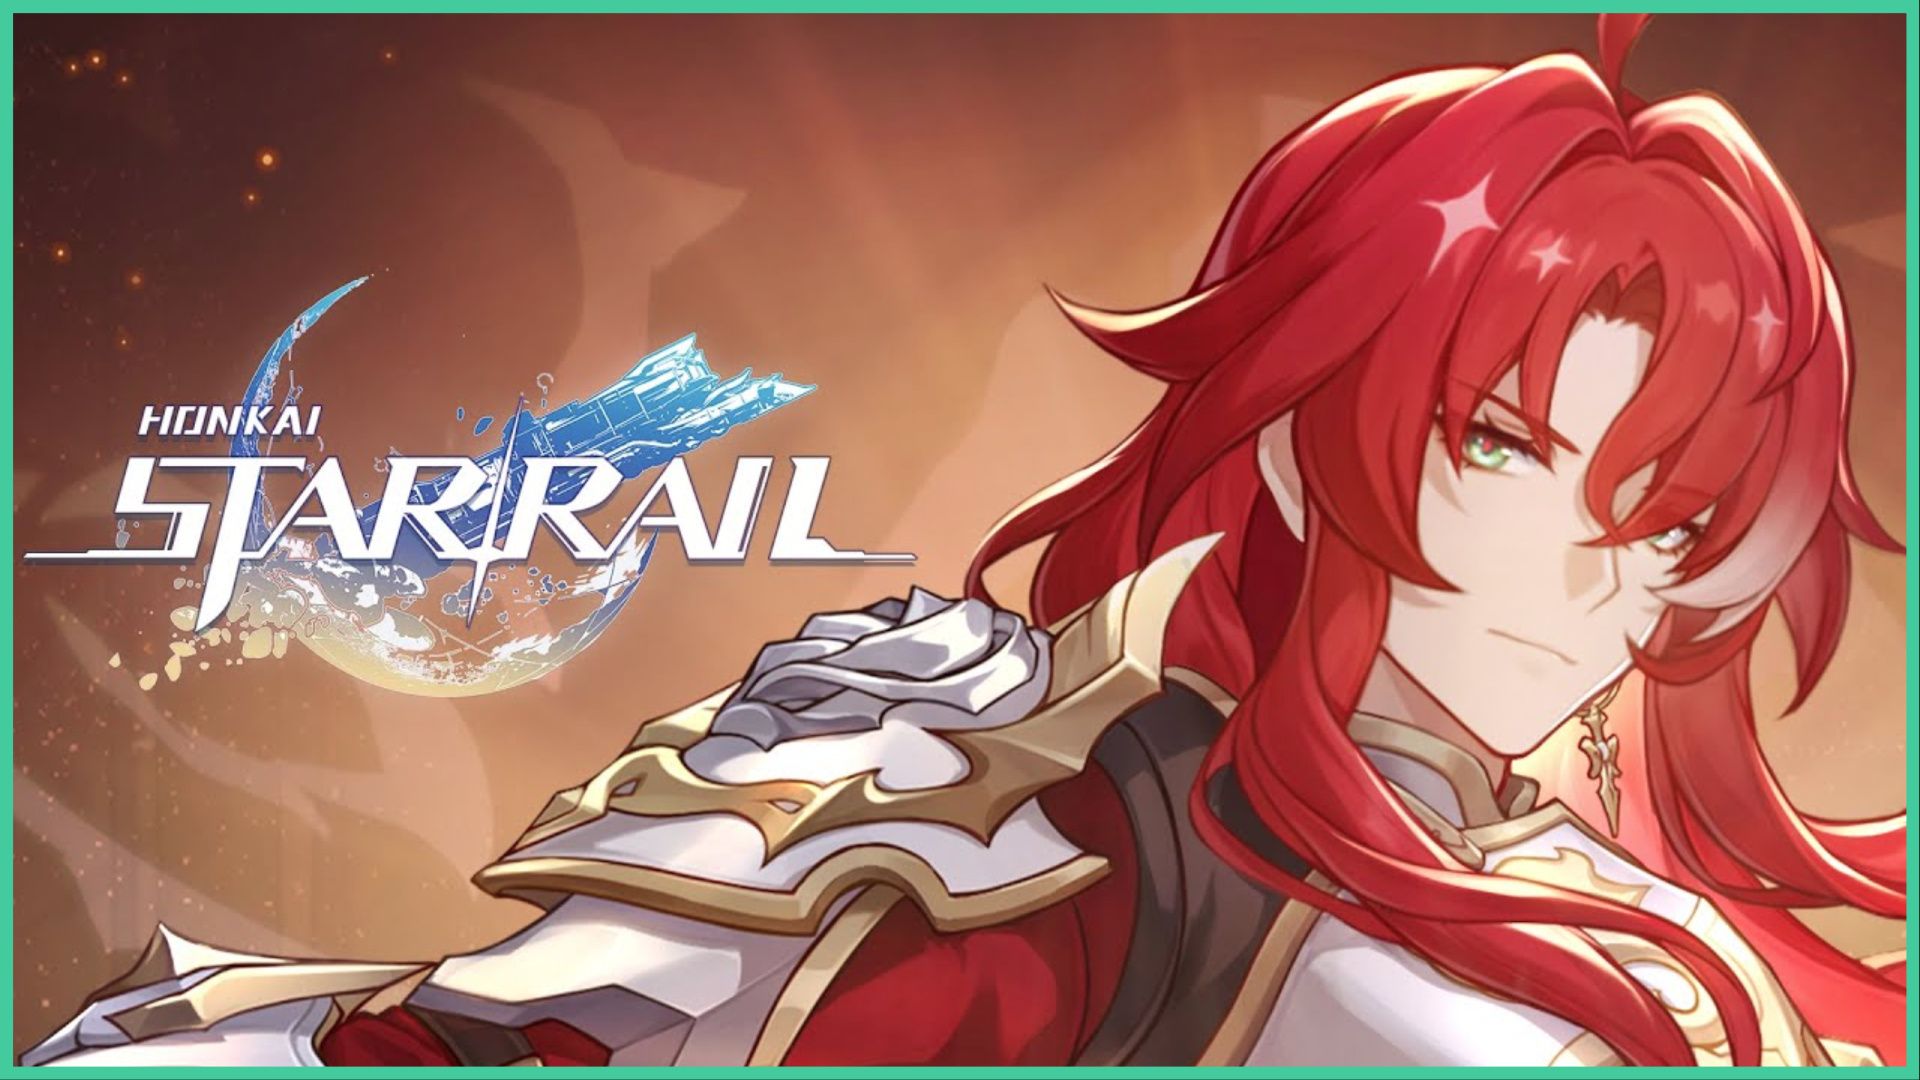 feature image for our honkai star rail argenti tier list, the image features art of argenti as he looks at the viewer and smiles slightly while wearing armor and one earring, the game's logo is to the left side